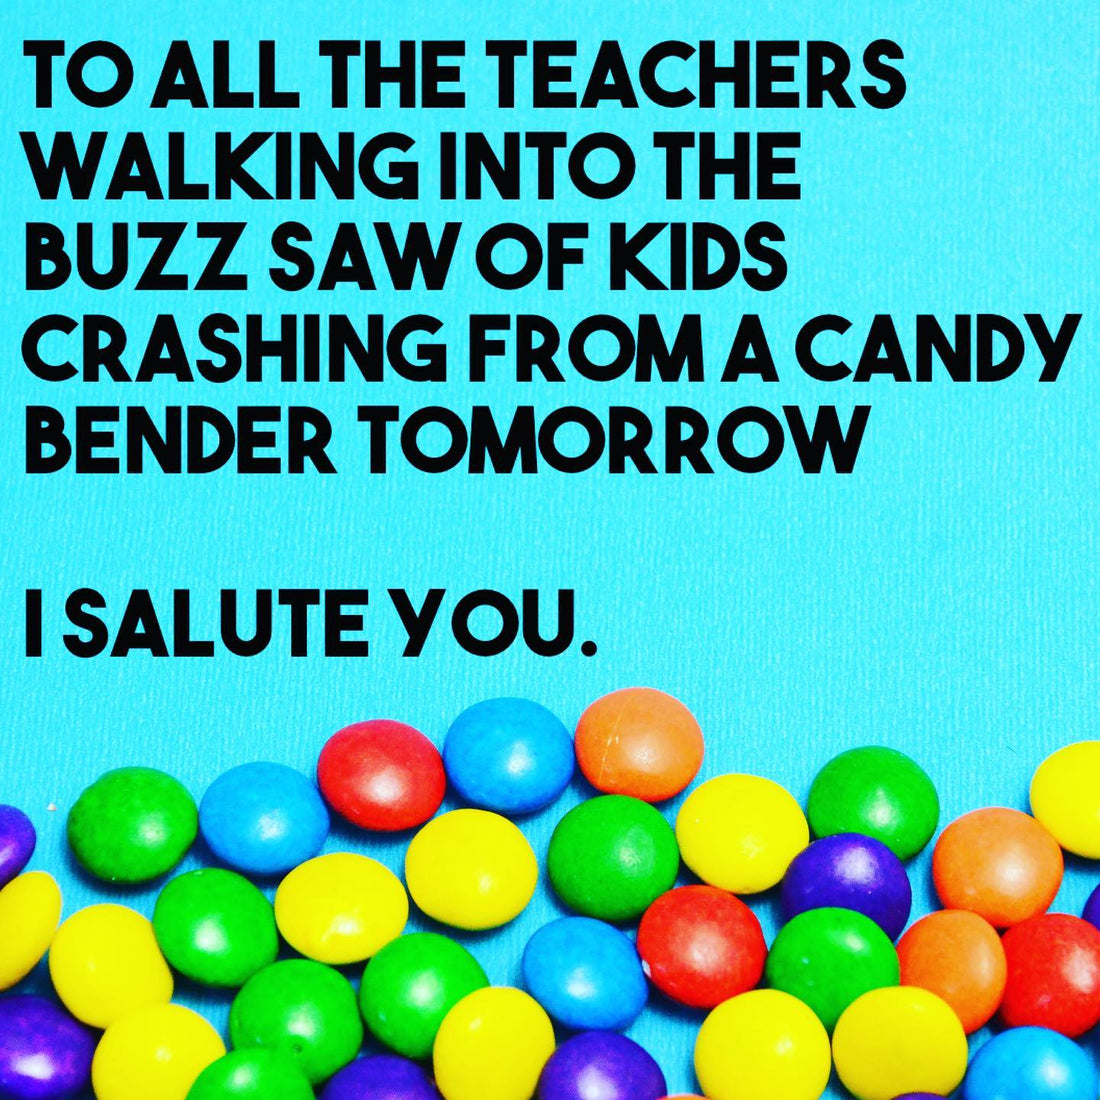 To all the teachers